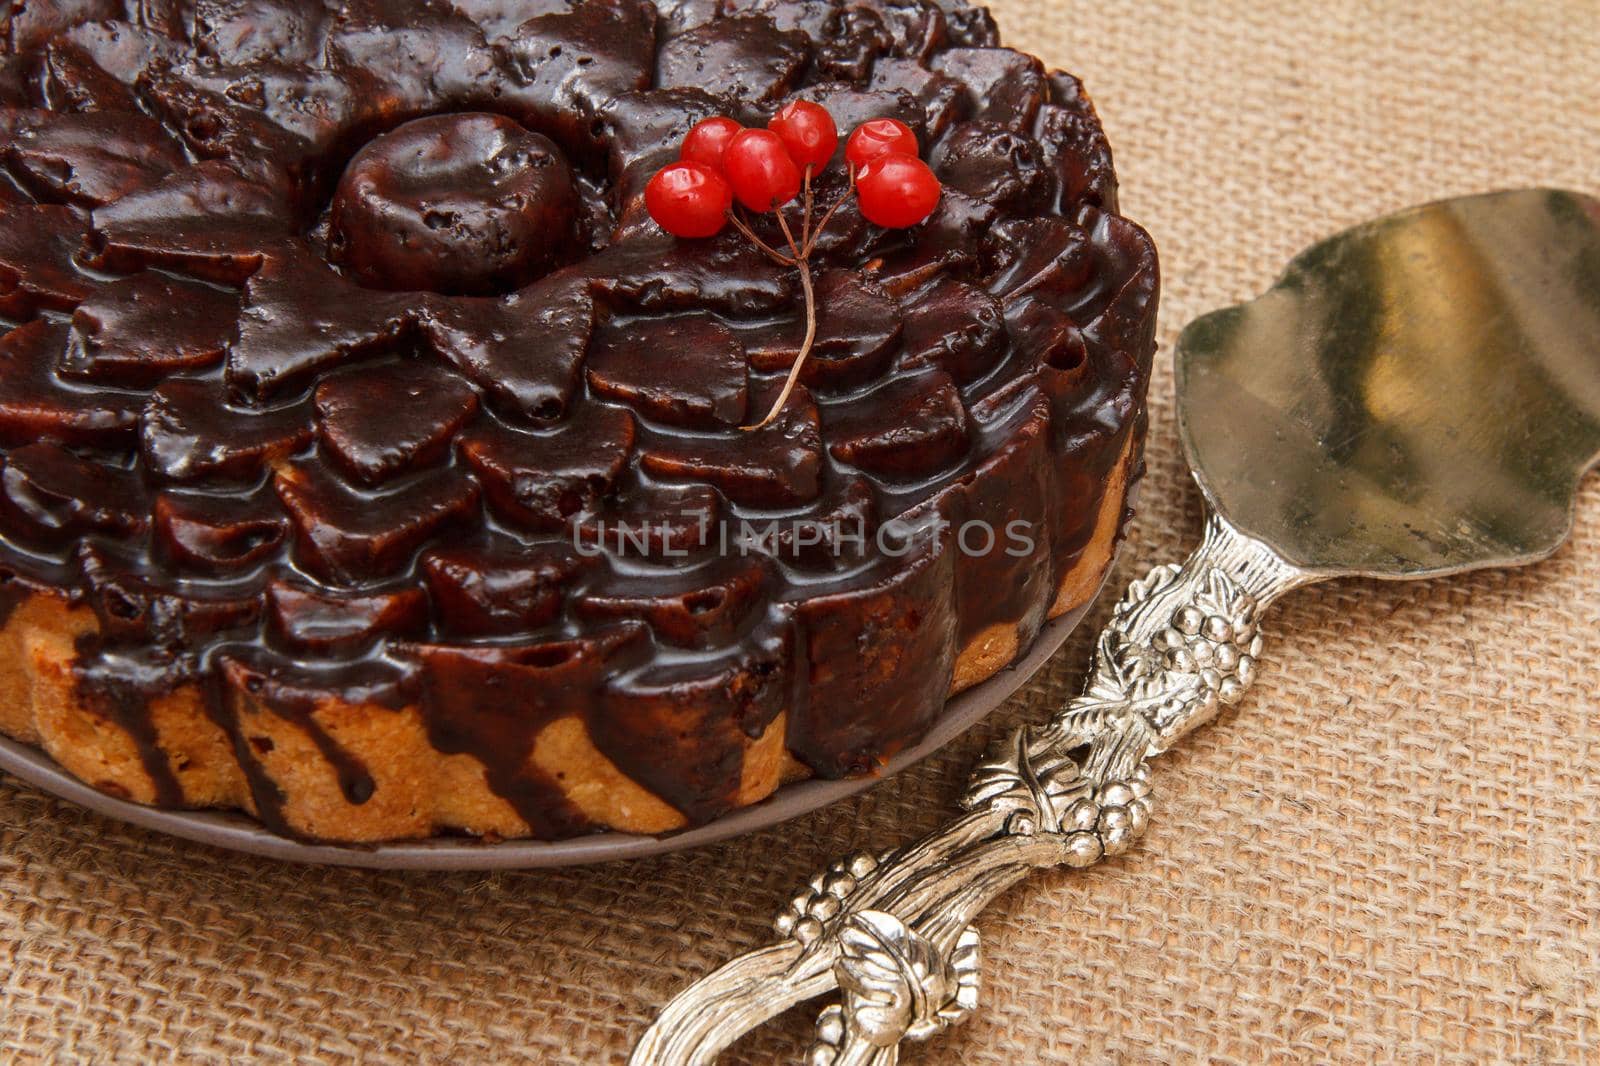 Chocolate cake decorated with bunch of viburnum and silver cake lifter beside it on table with sackcloth